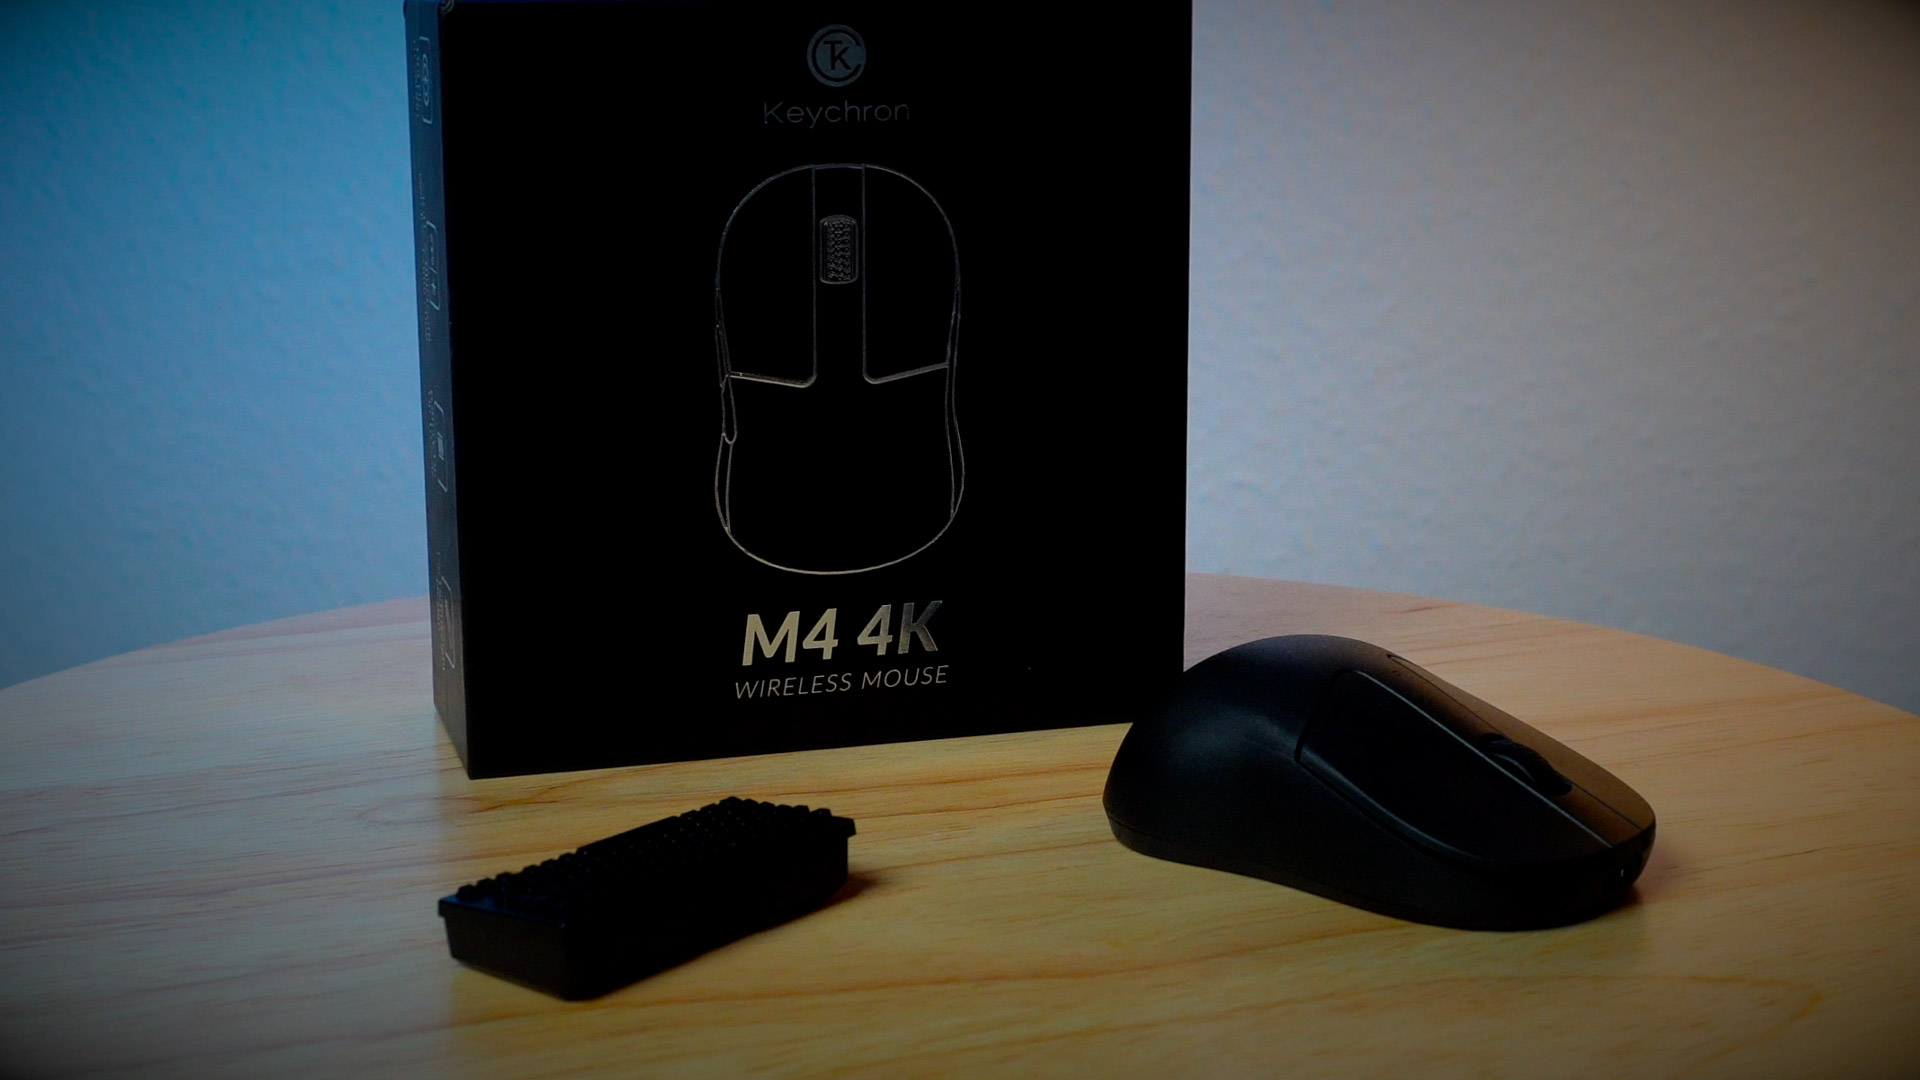 Keychron M4 4K Review: Light, Compact & Worth It?